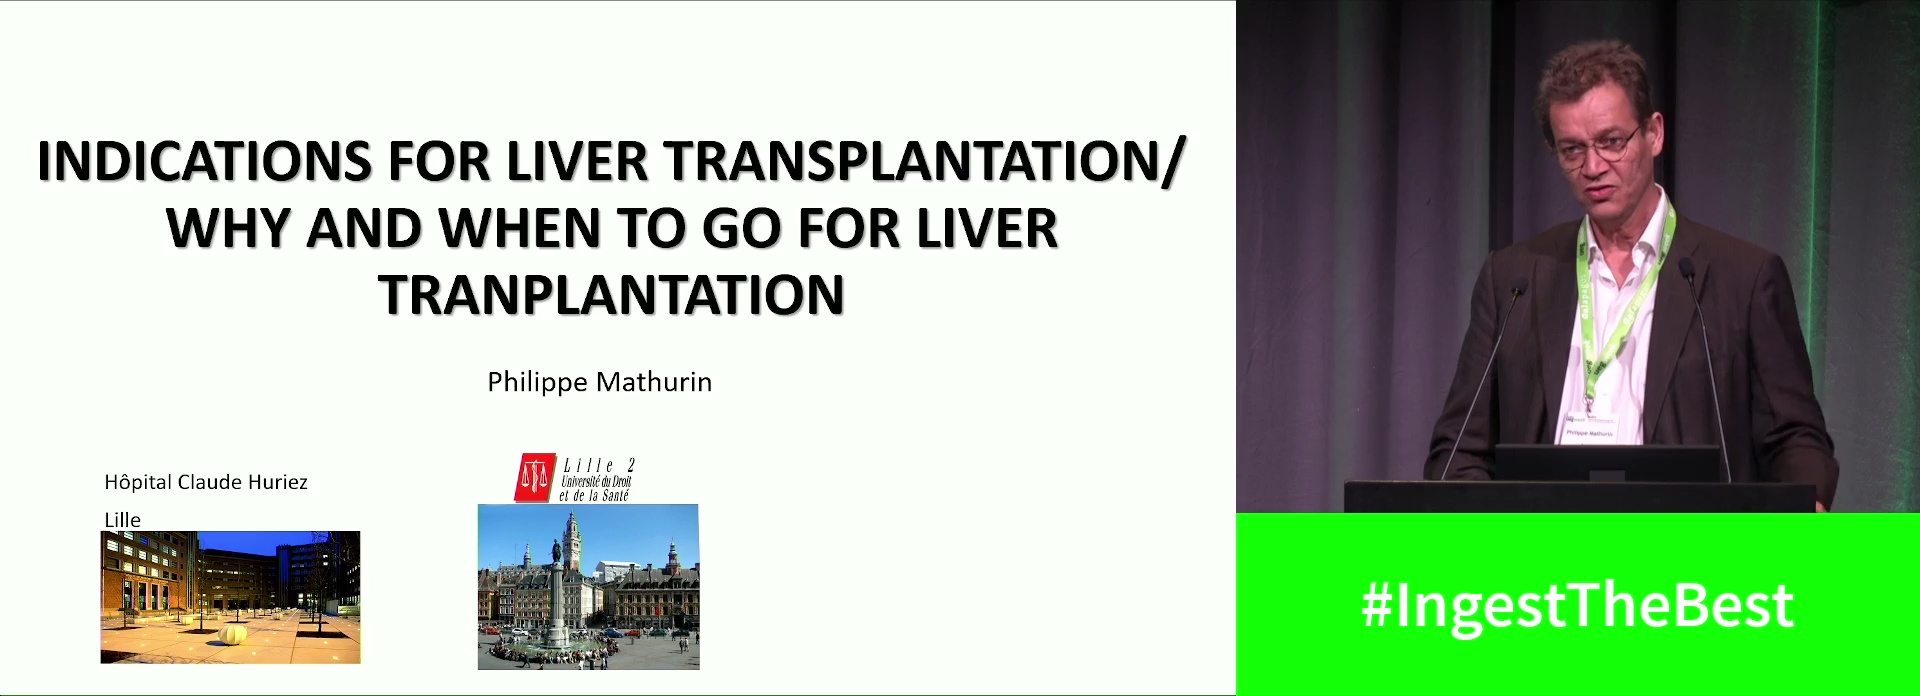 Indications for liver transplantation: Why and when to go for liver transplantation?